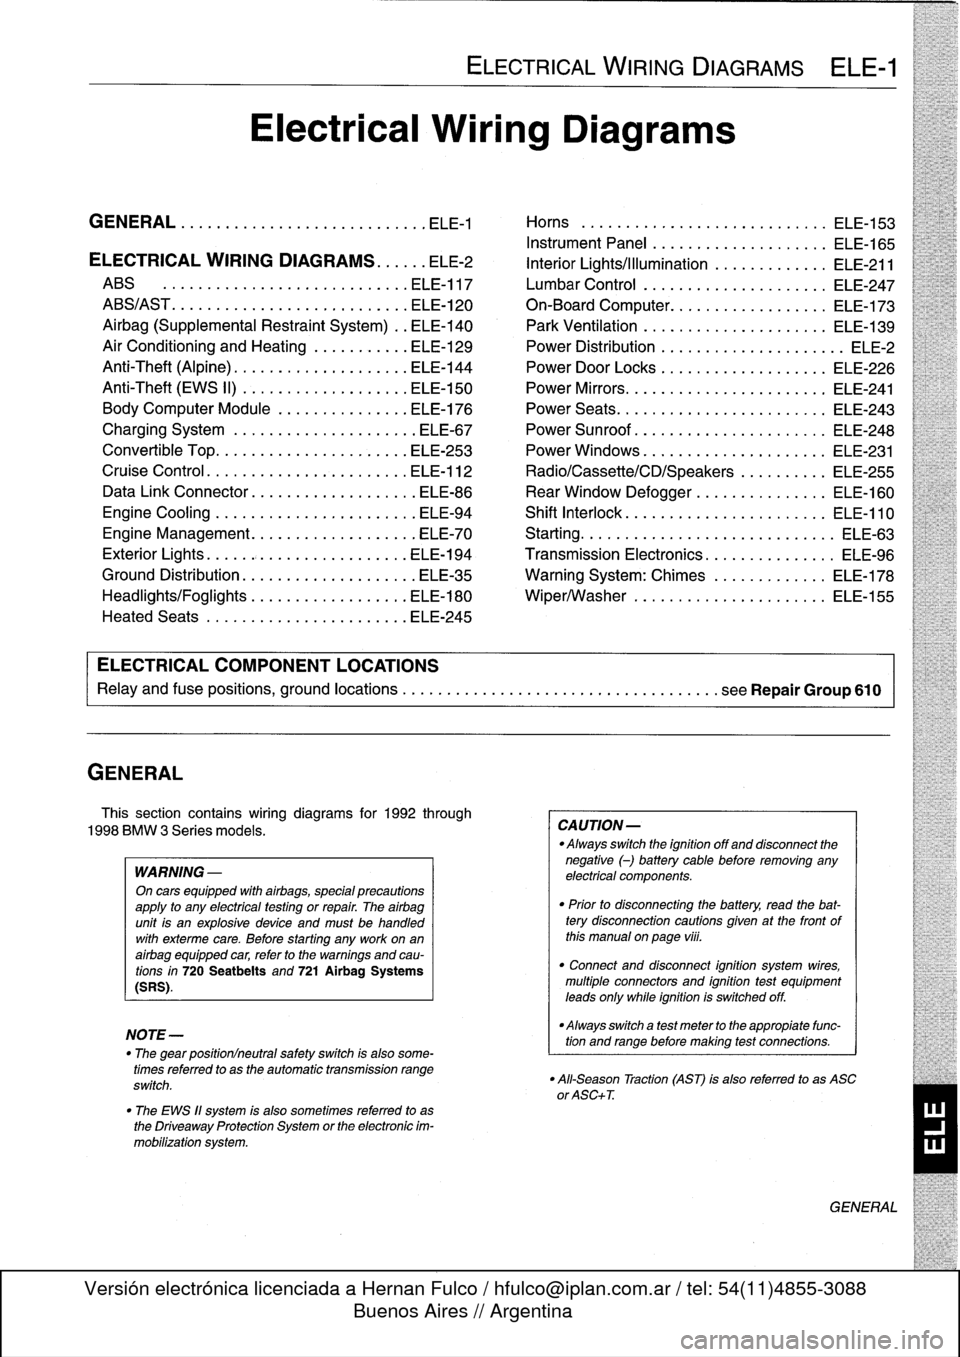 BMW 323i 1993 E36 Owners Manual 
GENERAL

This
section
contains
wiring
diagrams
for
1992
through

1998
BMW
3
Series
models
.

WARNING
-

On
cars
equipped
with
airbags,
special
precautions
apply
to
any
electrical
testing
or
repair
.
